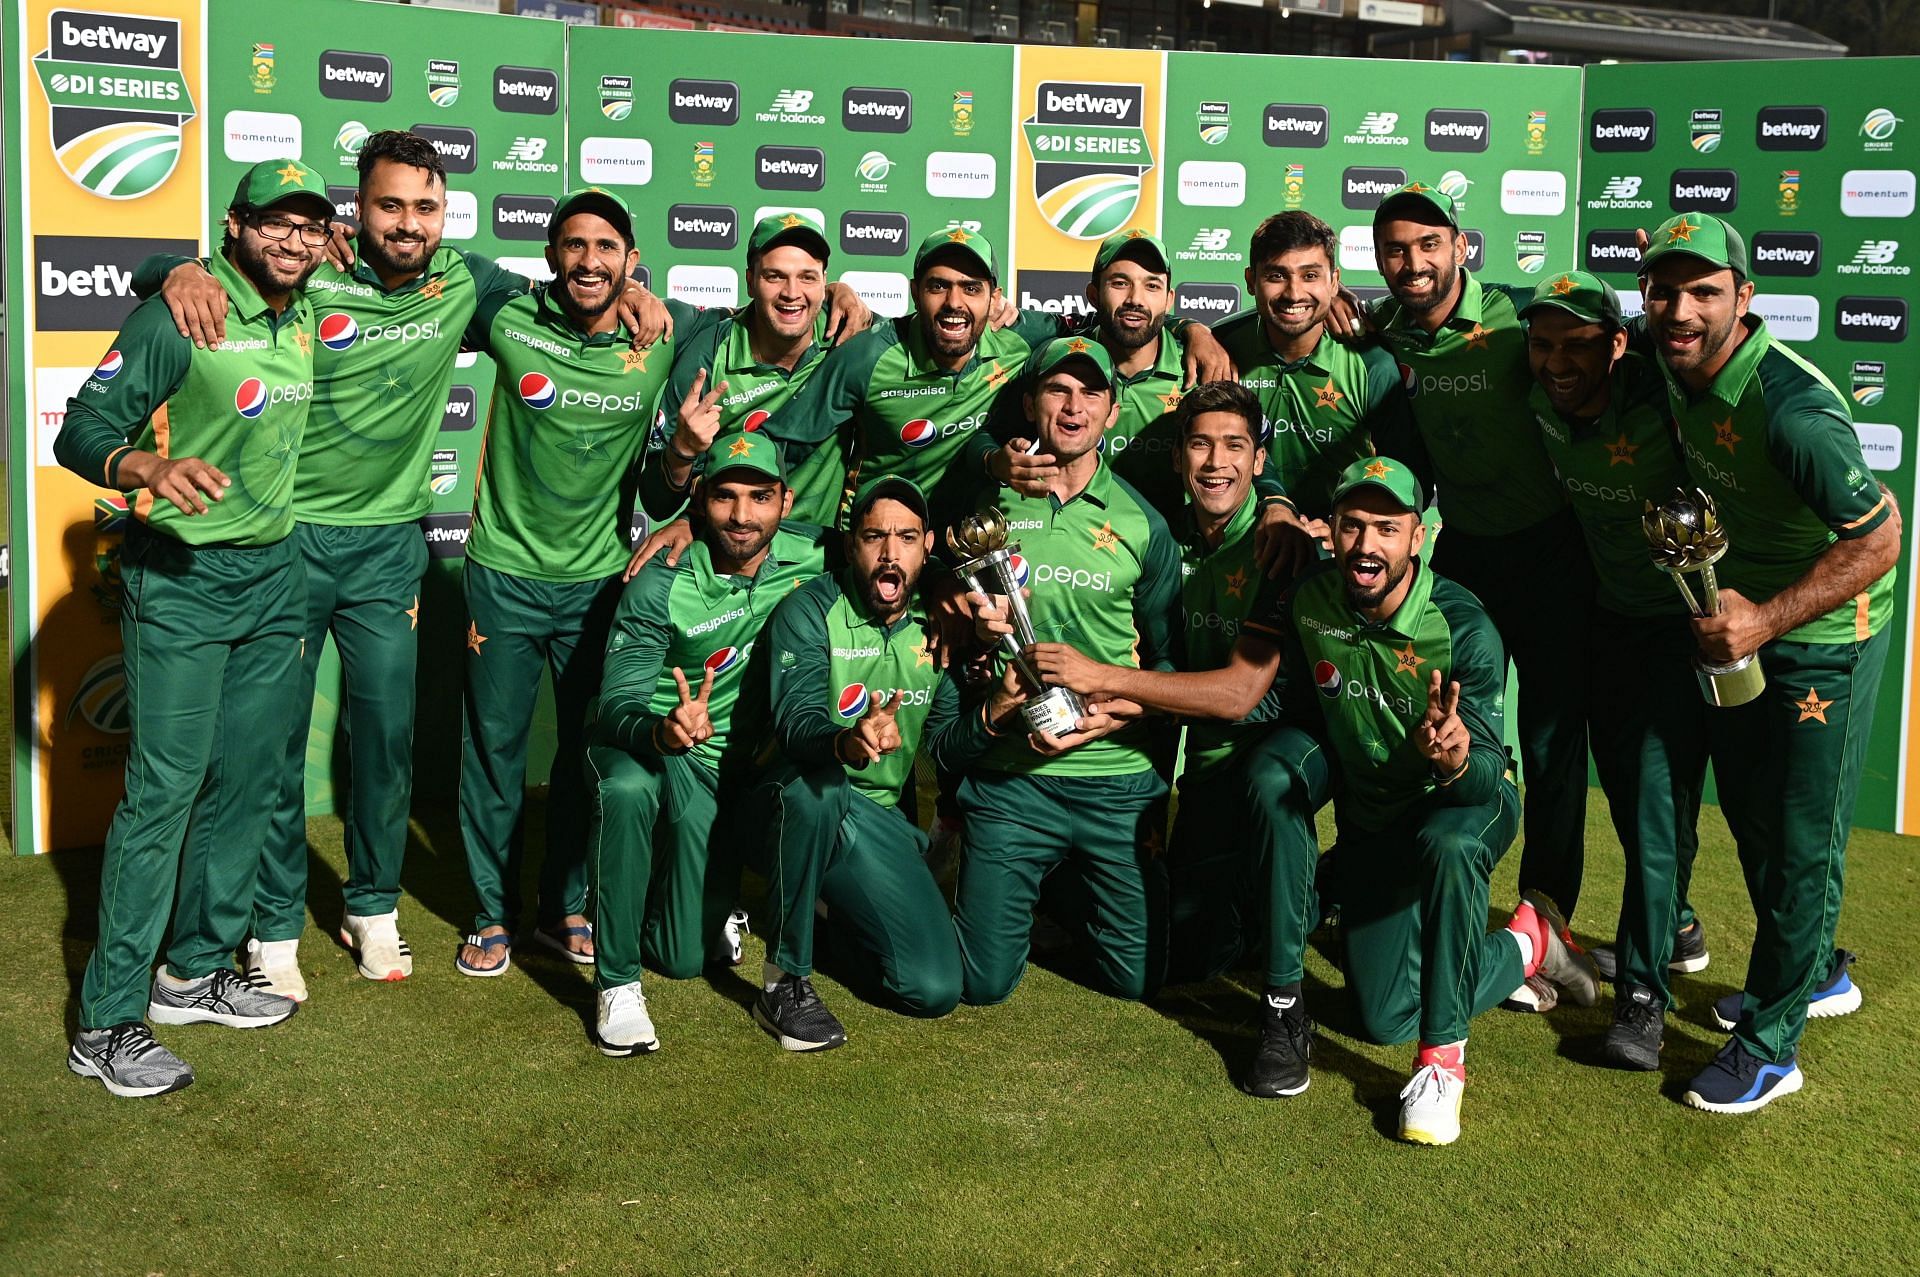 Pakistan have looked very good so far at the 2021 T20 World Cup.